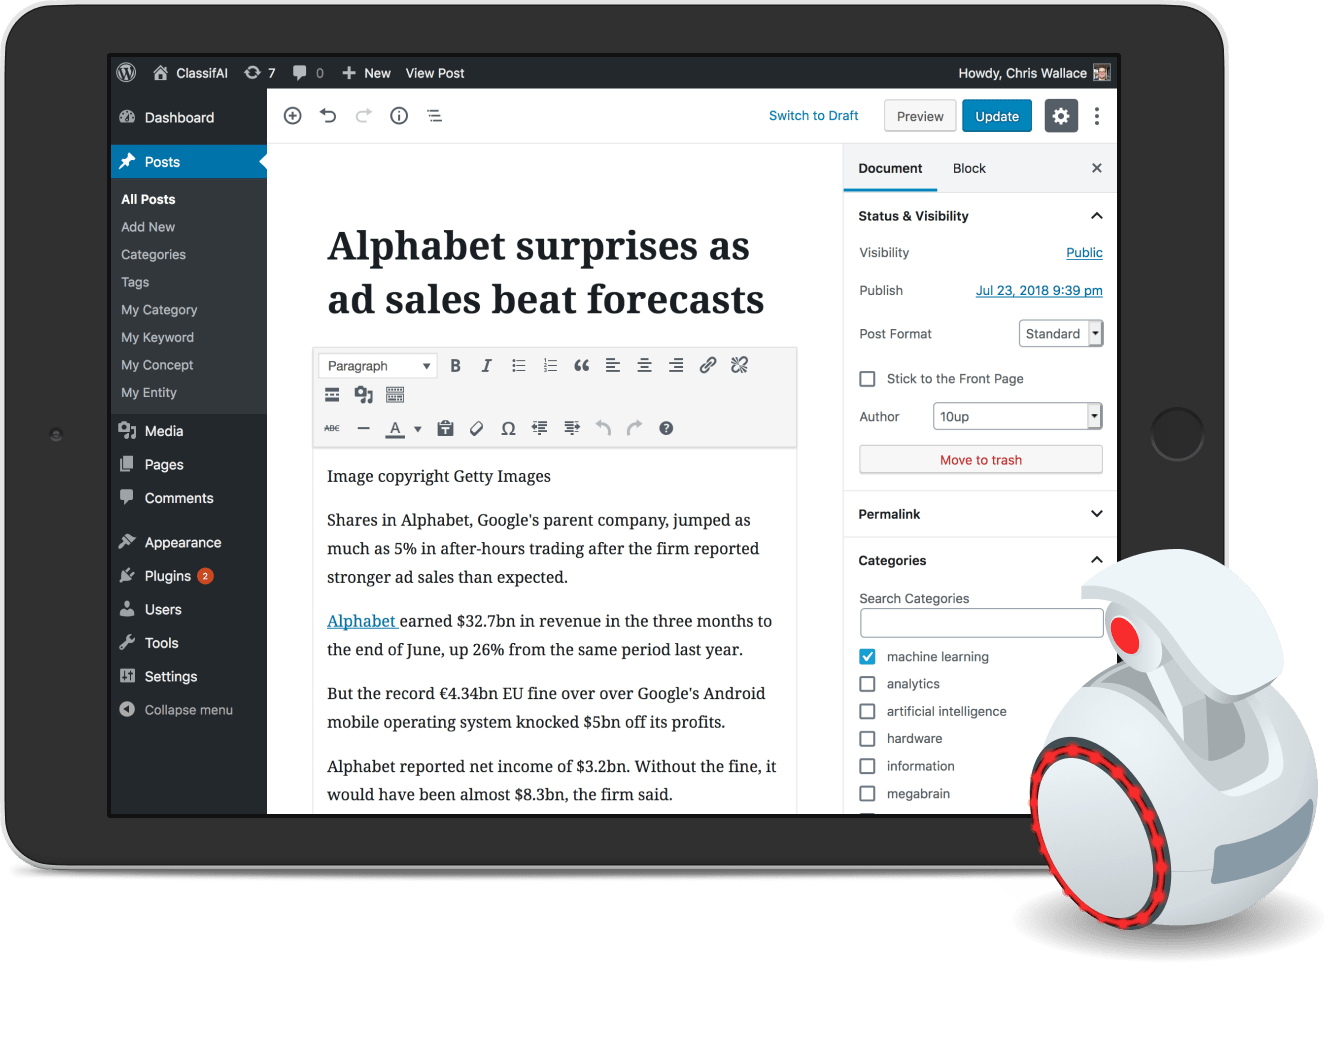 A small robot reviewing the content of a WordPress site, representing artificial intelligence and machine learning.